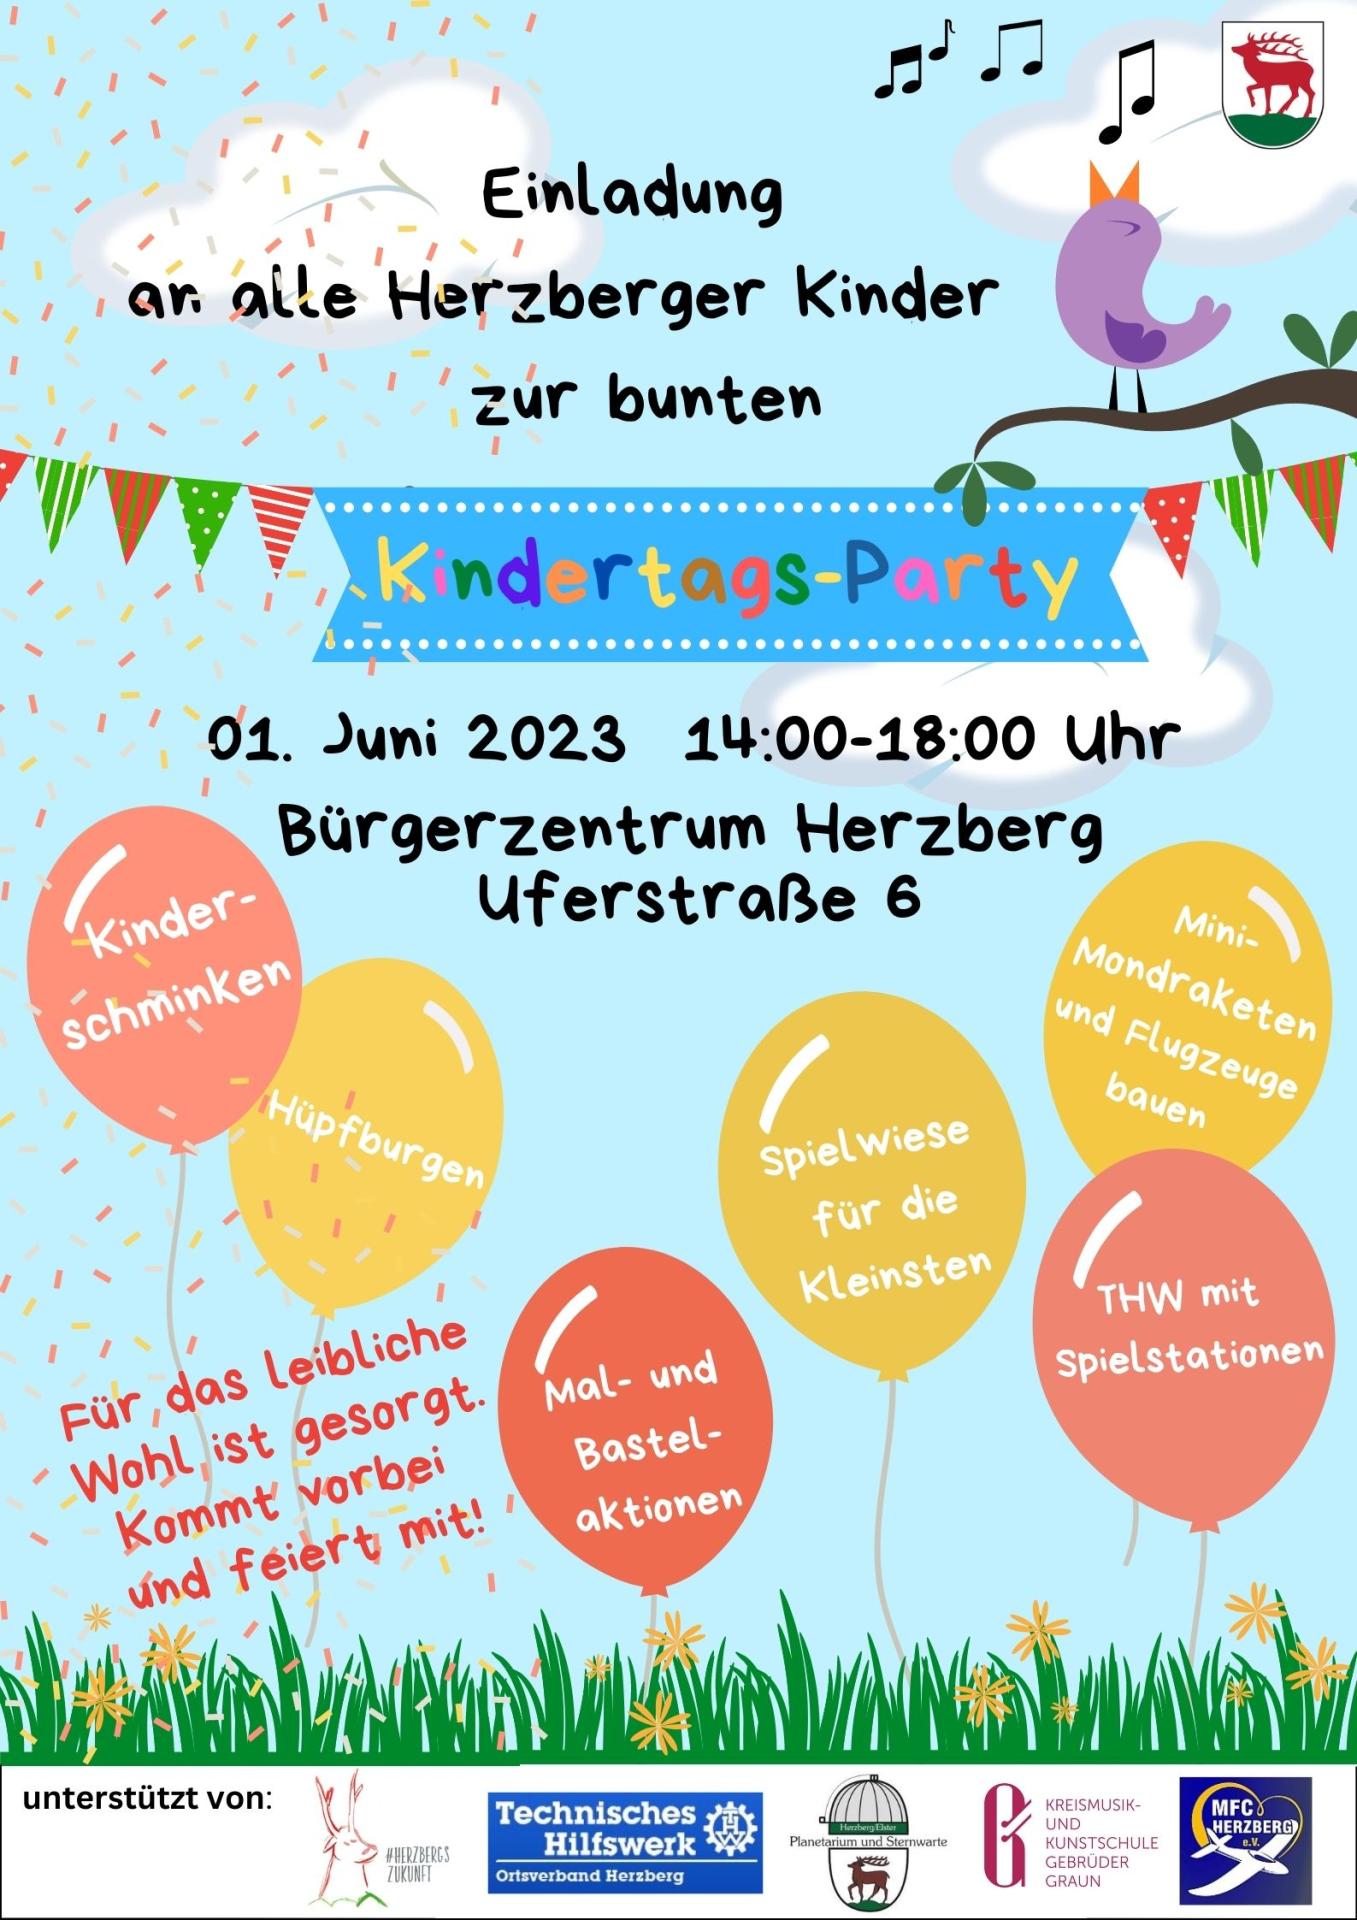 Kindertags-Party